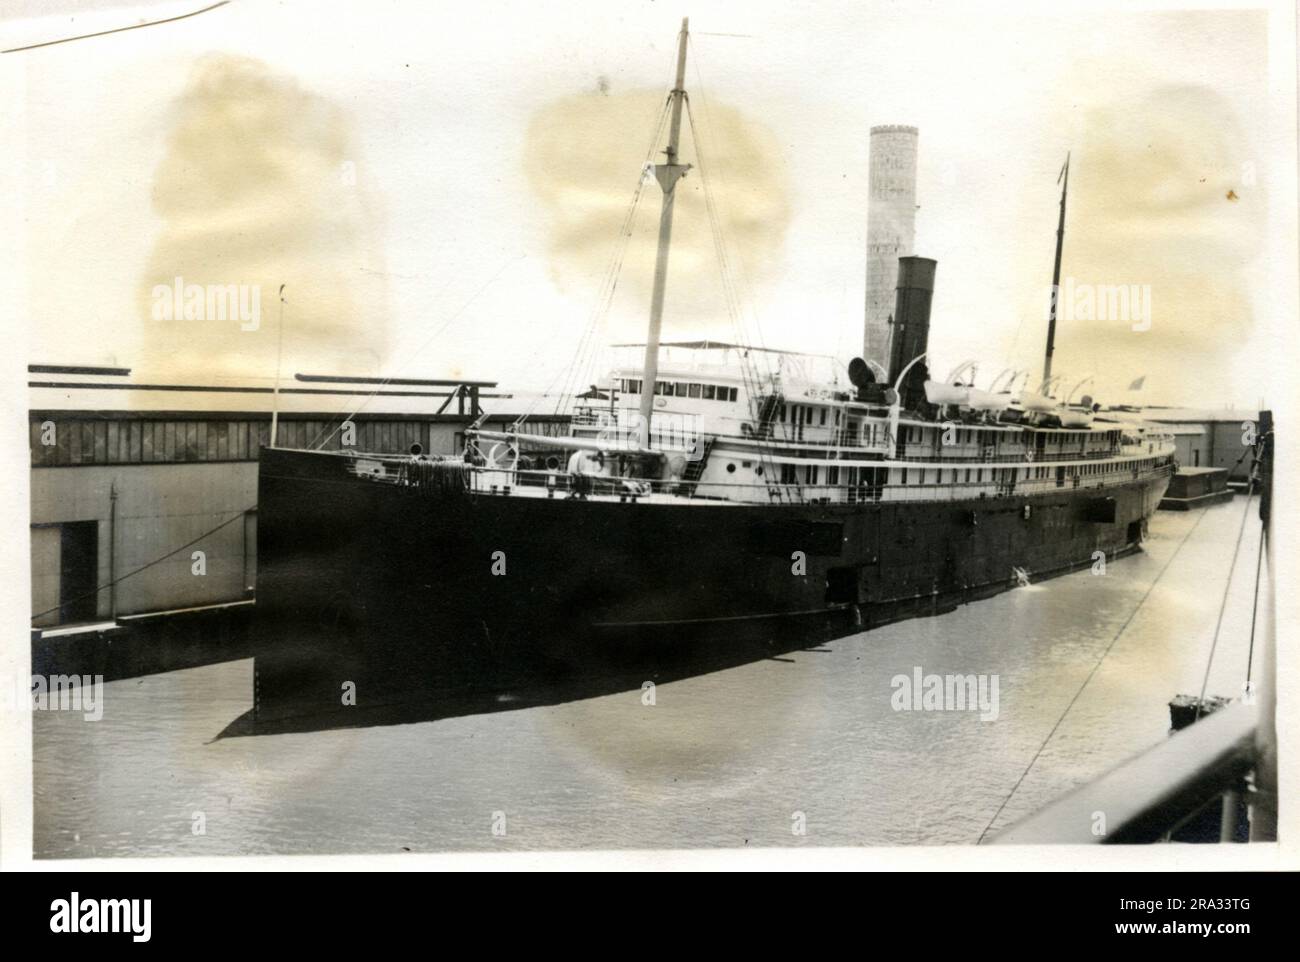 Photograph of the Port View of the SS City of Montgomery. Port View. Date: - July 27 1918. Photograph : - S. S. City Of Montgomery. Nationality: - American. Tonnage: - 5425. Captain: - M. A. Hammond. Owners: - Ocean S.S. Co. Where From: - New York, N. Y. Destination: - New York, N. Y. Where Photographed: - Savannah, GA. Sixth Naval District. By Whom Photographed: - J. B. Dearborn. Date Photographed July 13th., 1918.. 1918-07-13T00:00:00. Stock Photo